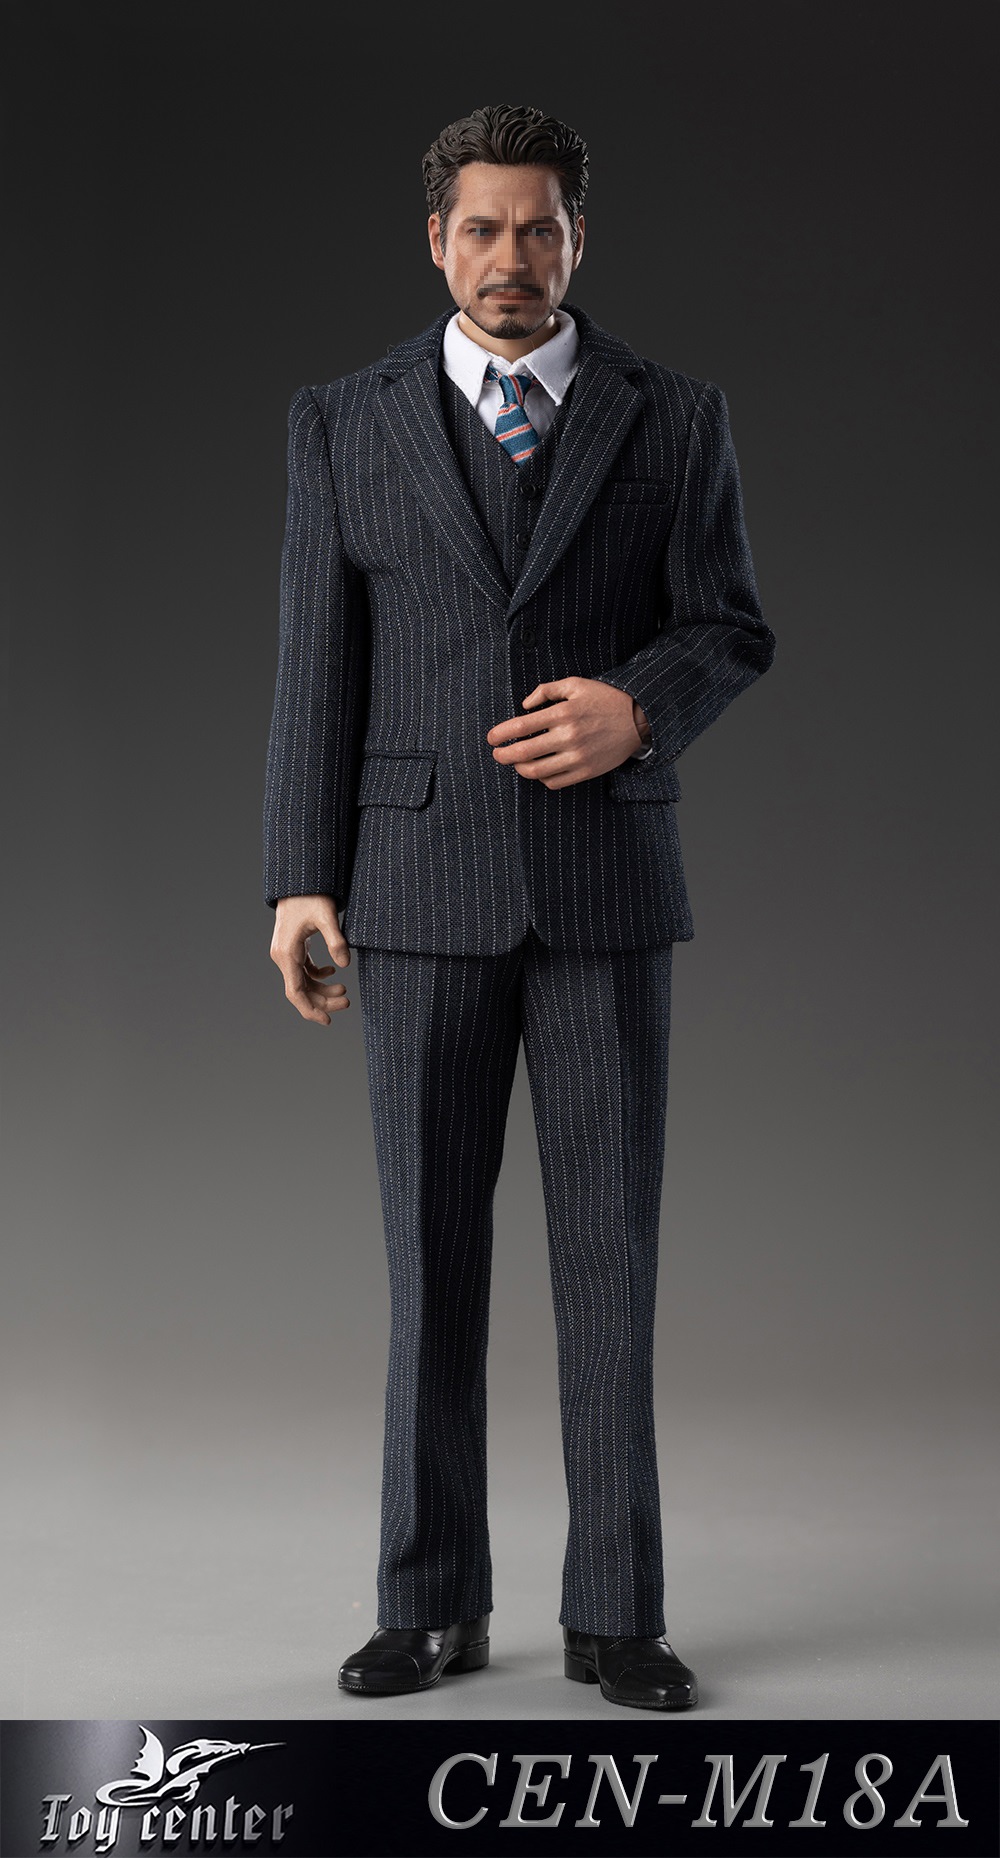 Clothing - NEW PRODUCT: Toy center: 1/6 British Gentleman Tony Striped Suit CEN-M18 Three Colors 15522712